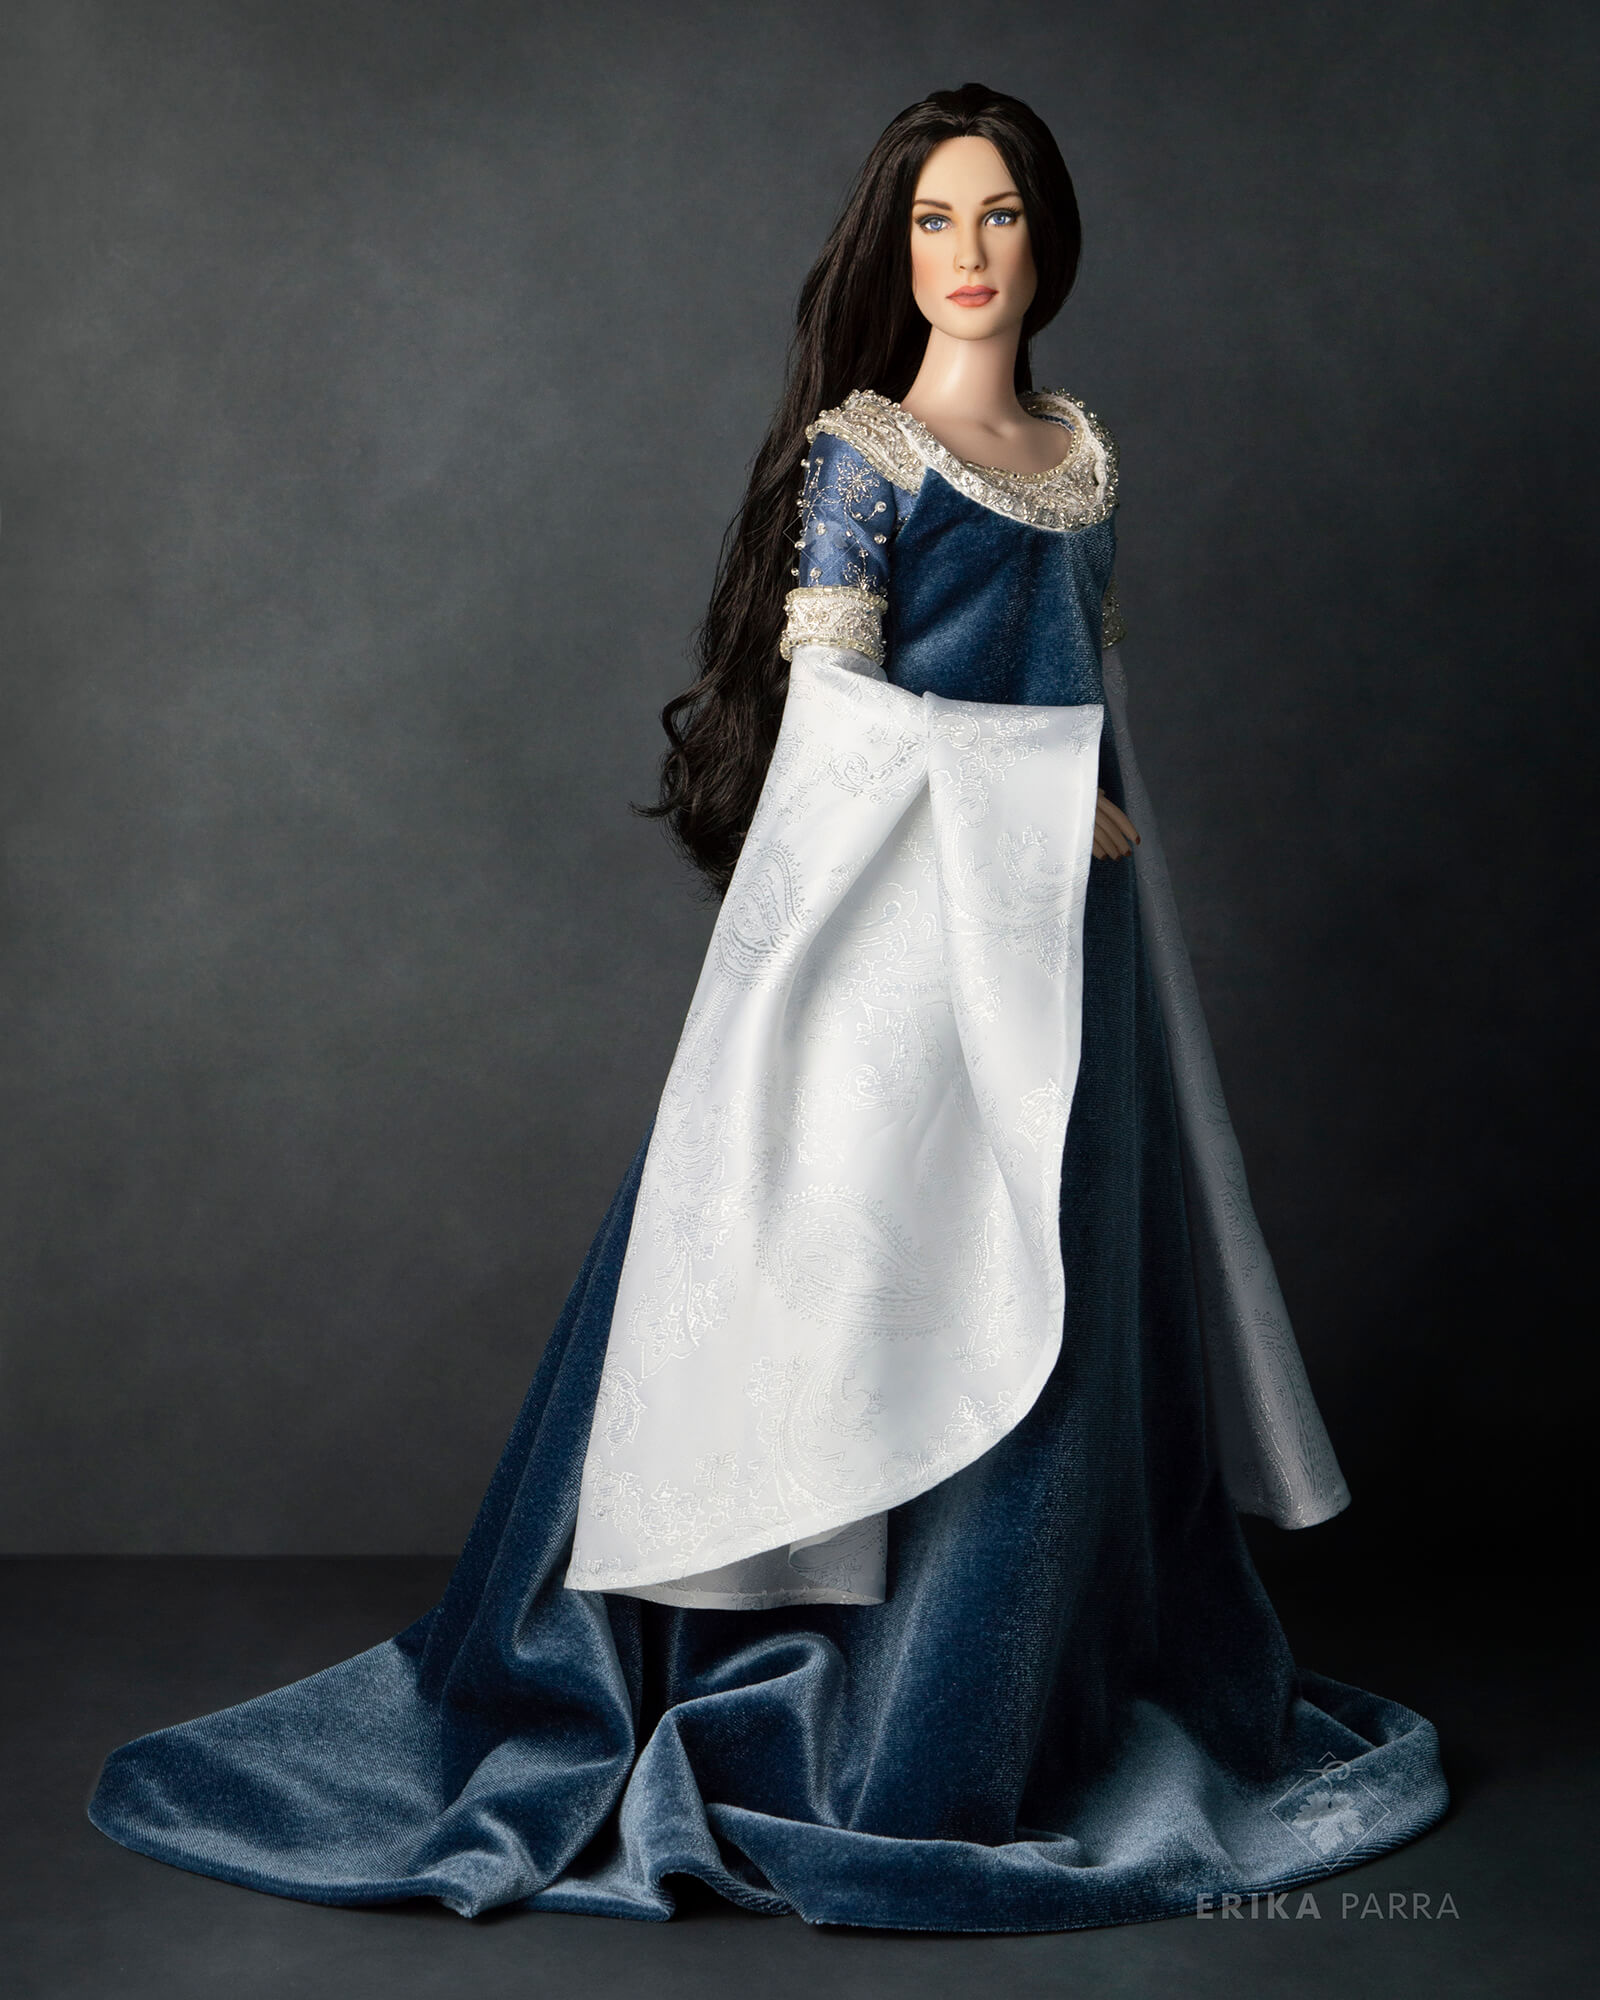 Lord Of the Rings Arwen's Requiem Doll gown by Erika Parra - Photo by Erika Parra